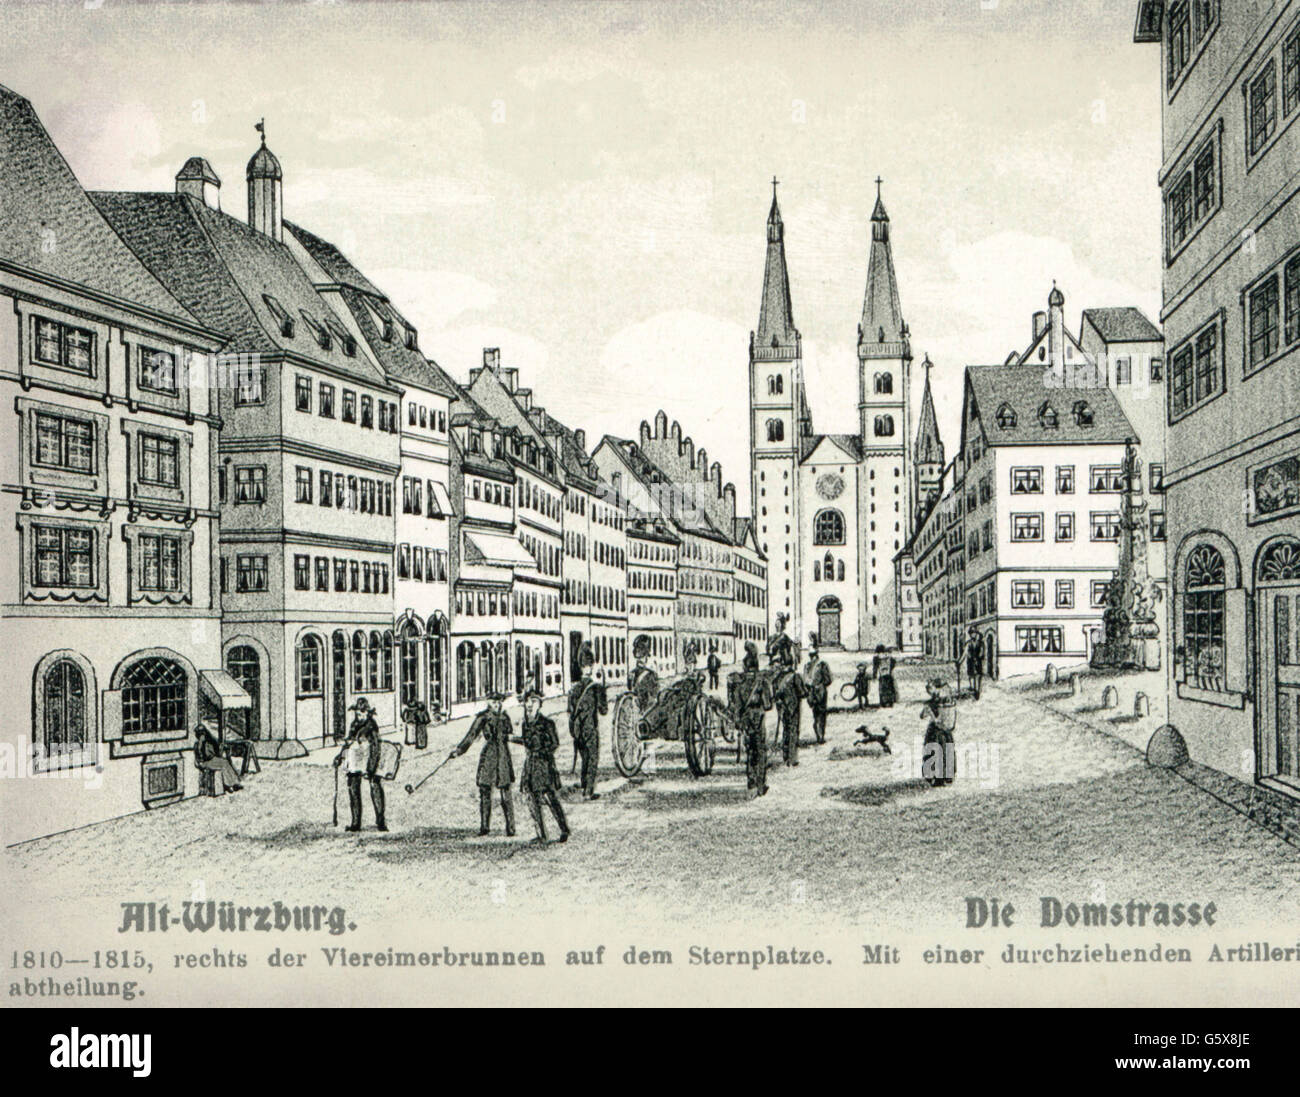 geography / travel, Germany, Wuerzburg, streets, Domstrasse, 1810 - 1815, Additional-Rights-Clearences-Not Available Stock Photo